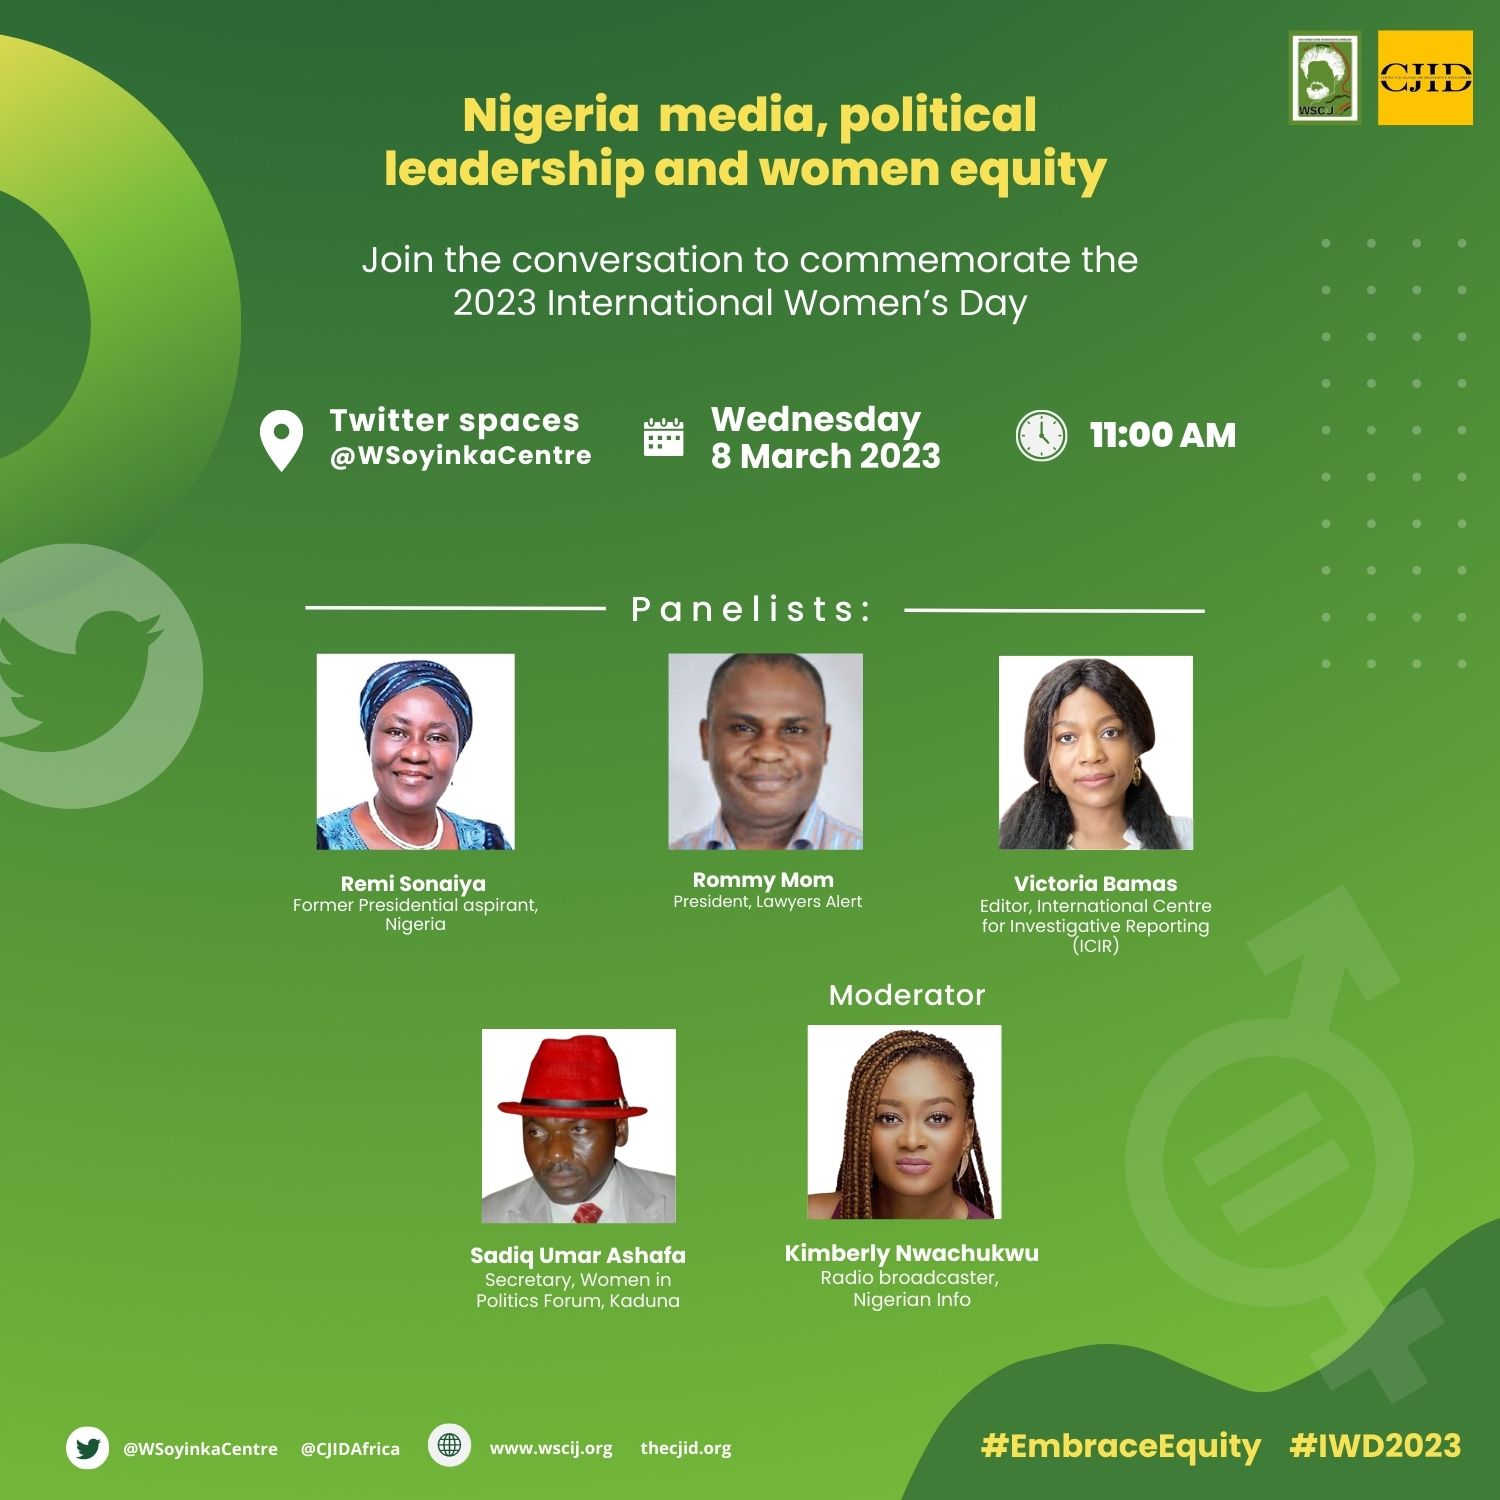 WSCIJ, CJID to host Twitter spaces on Nigeria media, political leadership and women equity